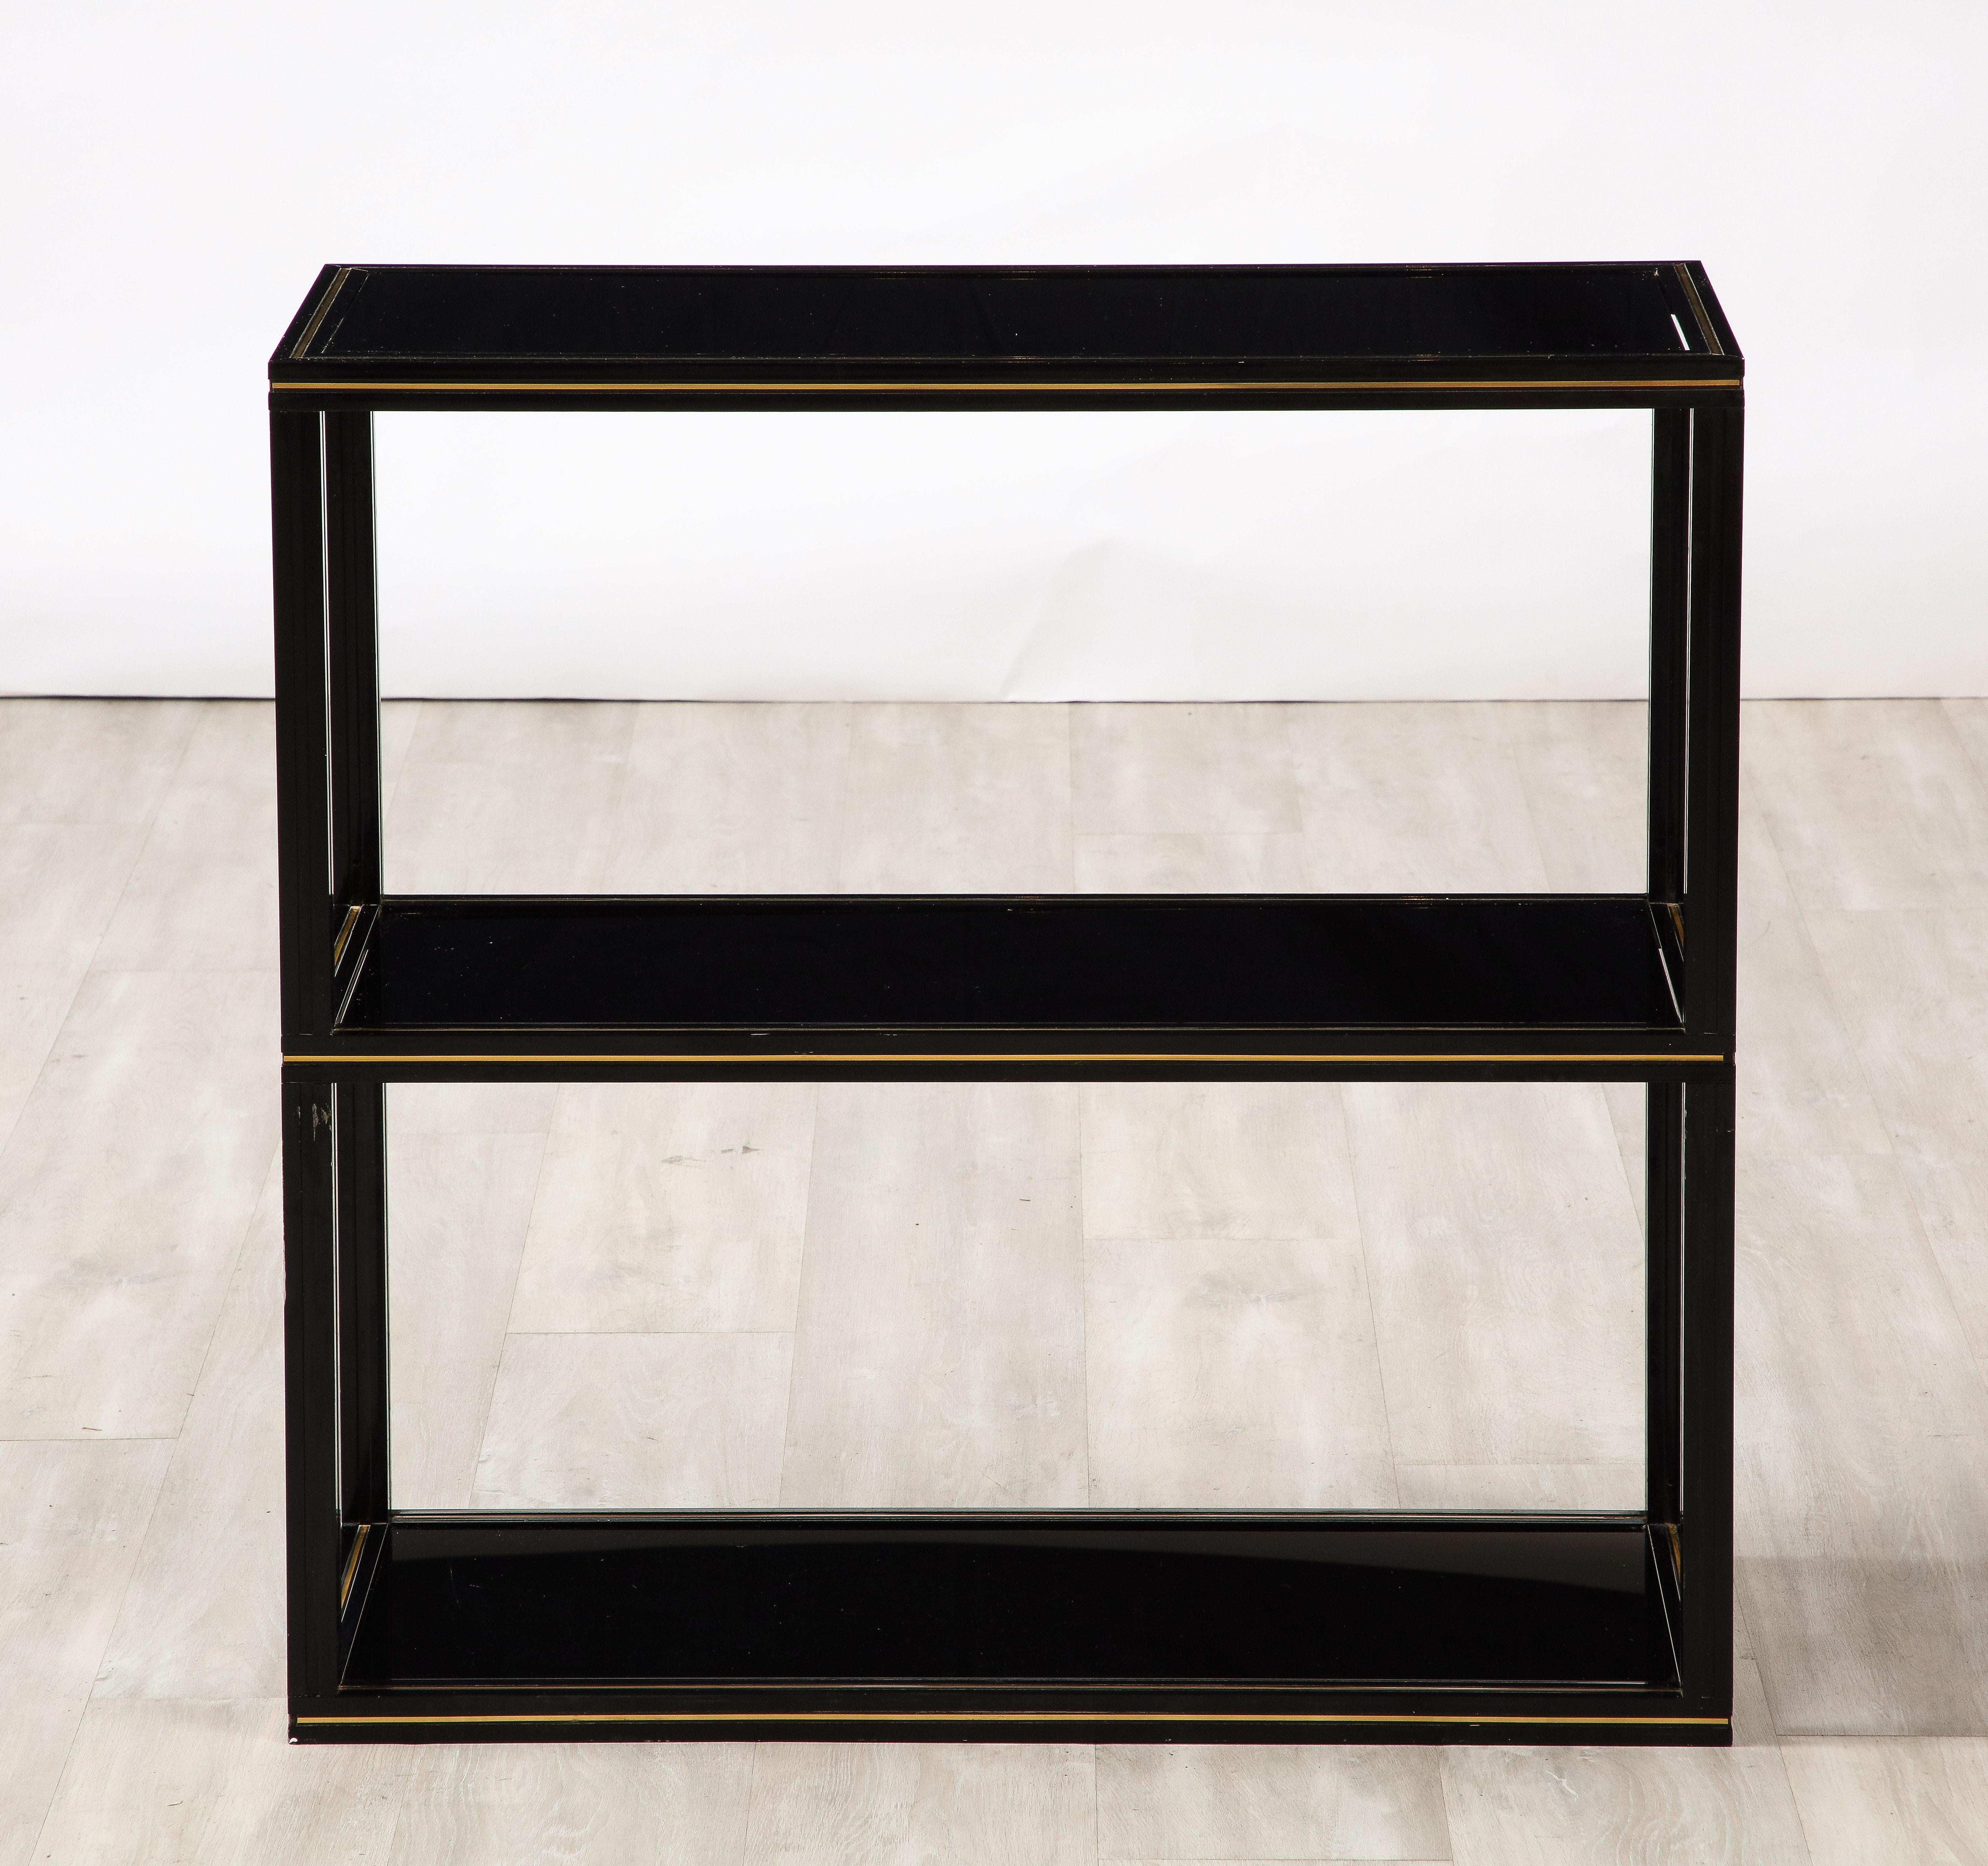 A Pierre Vandel black lacquered aluminum étagère with brass detailing and three black glass shelves. 
Labelled: Pierre Vandel
Paris, circa  1970
The cleanly defined lines of this shelving would be perfect for displaying studio pottery, books and